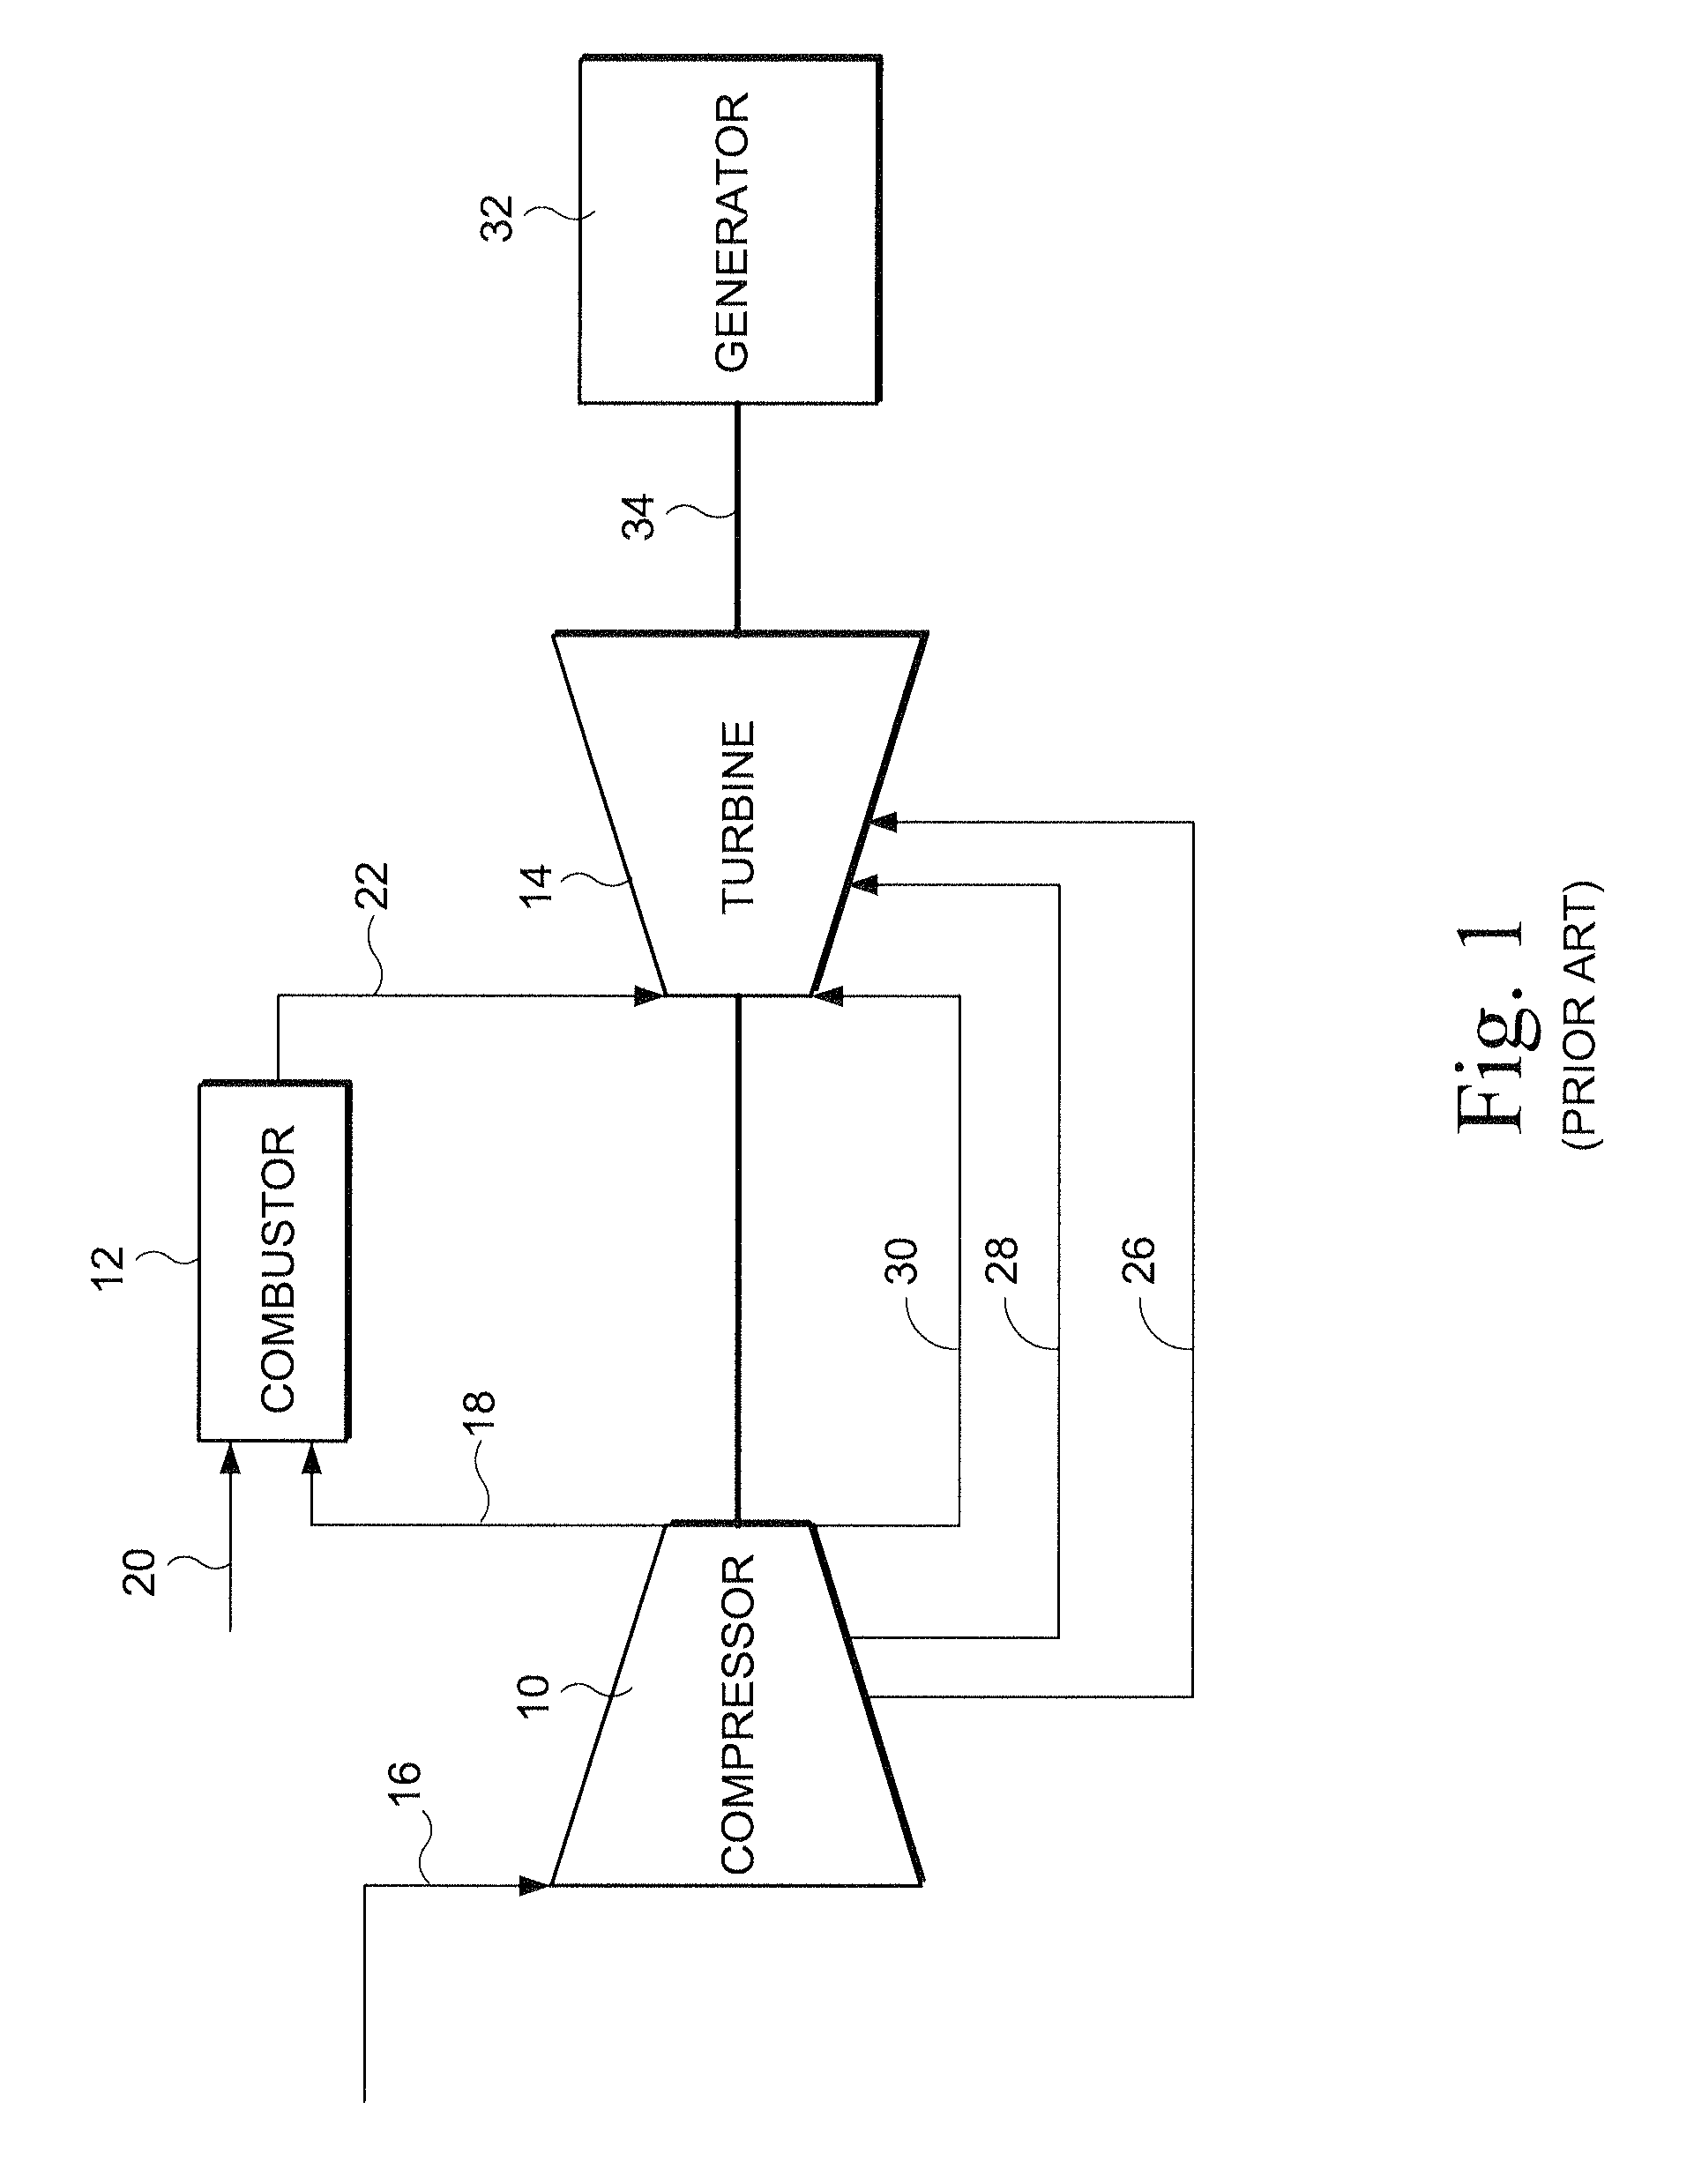 Apparatus and related methods for turbine cooling